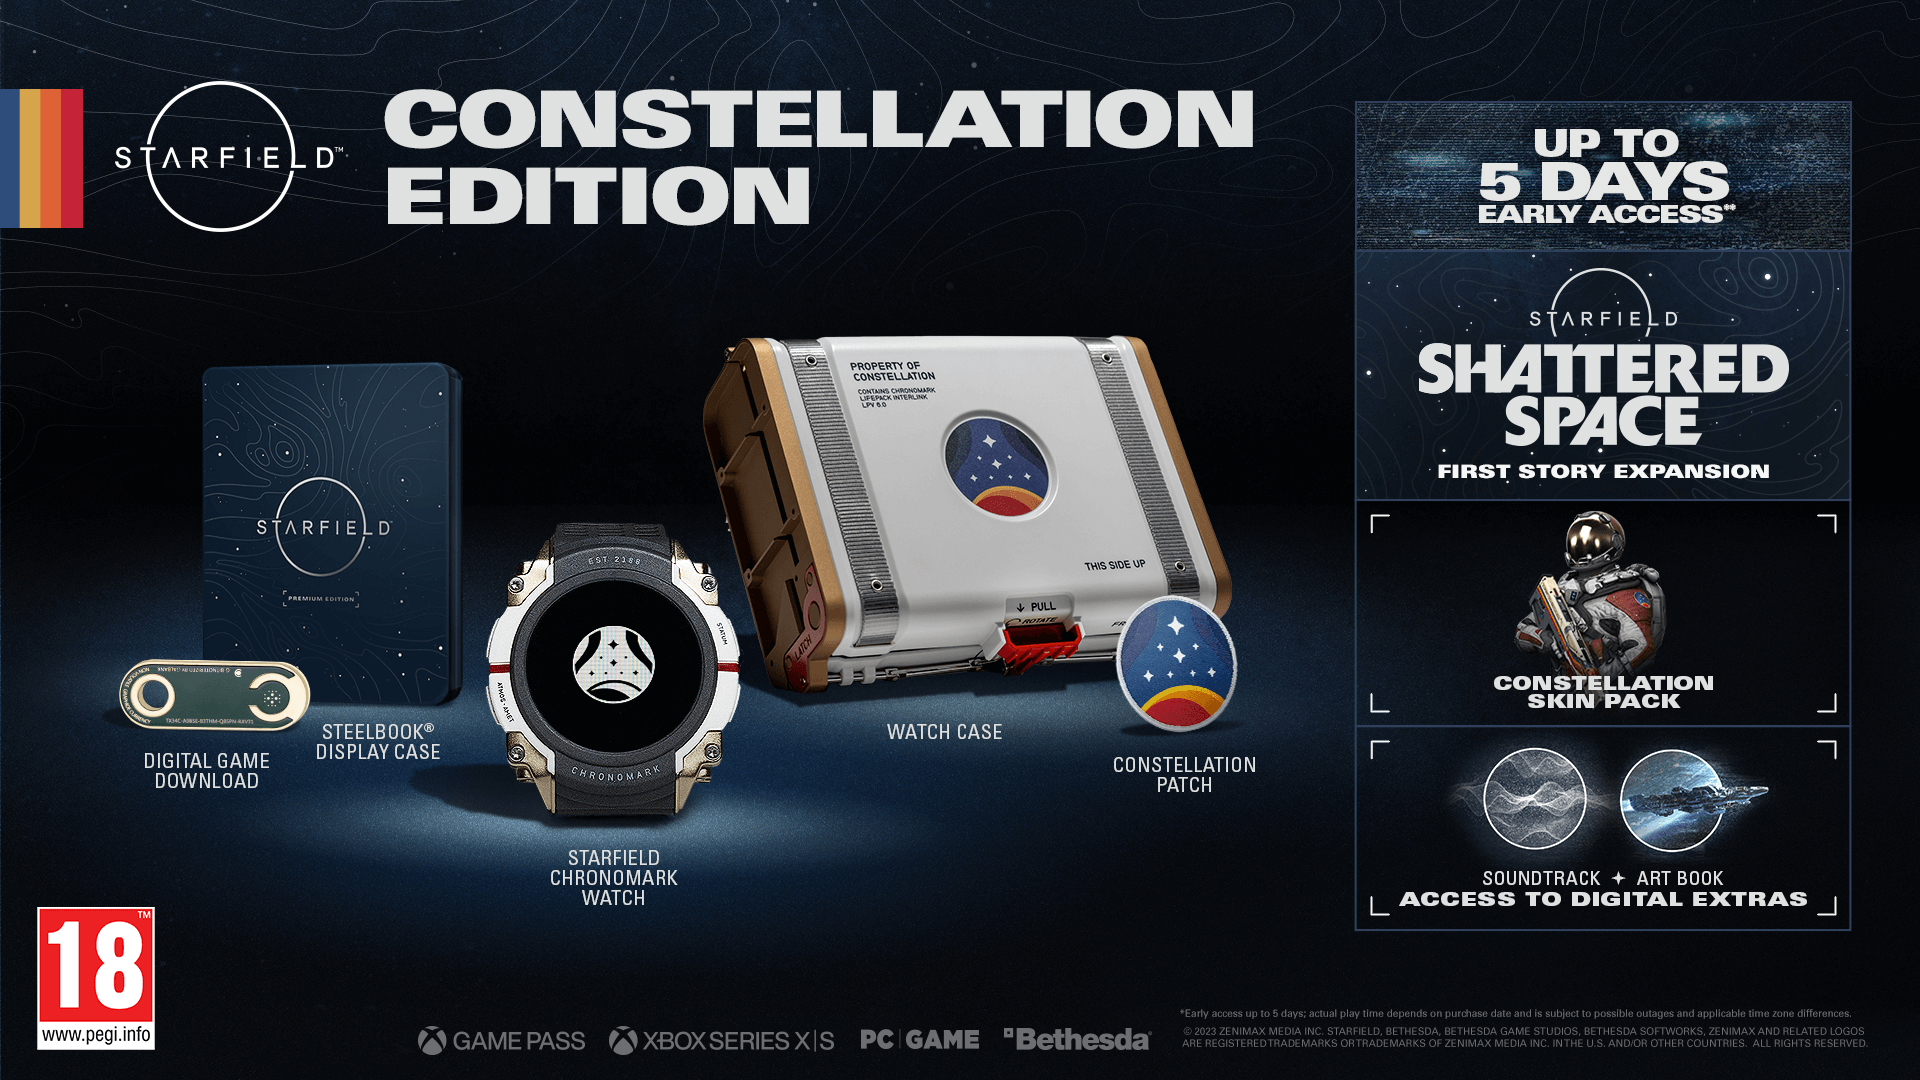 A promotional image for Starfield Constellation Edition, showing what is included in this collector's edition.